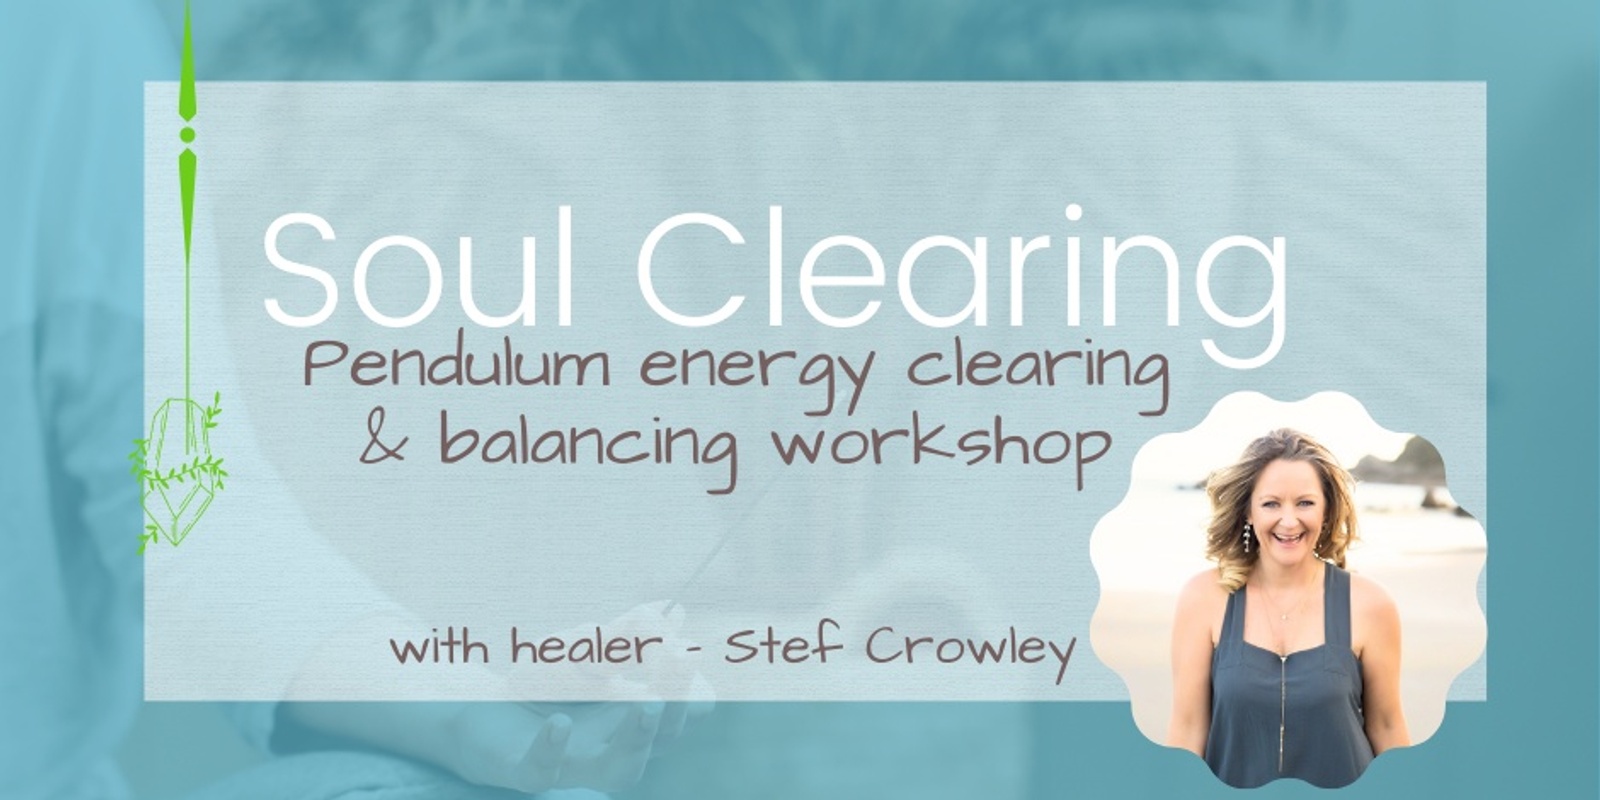 Banner image for Soul Clearing - pendulum clearing / balancing workshop